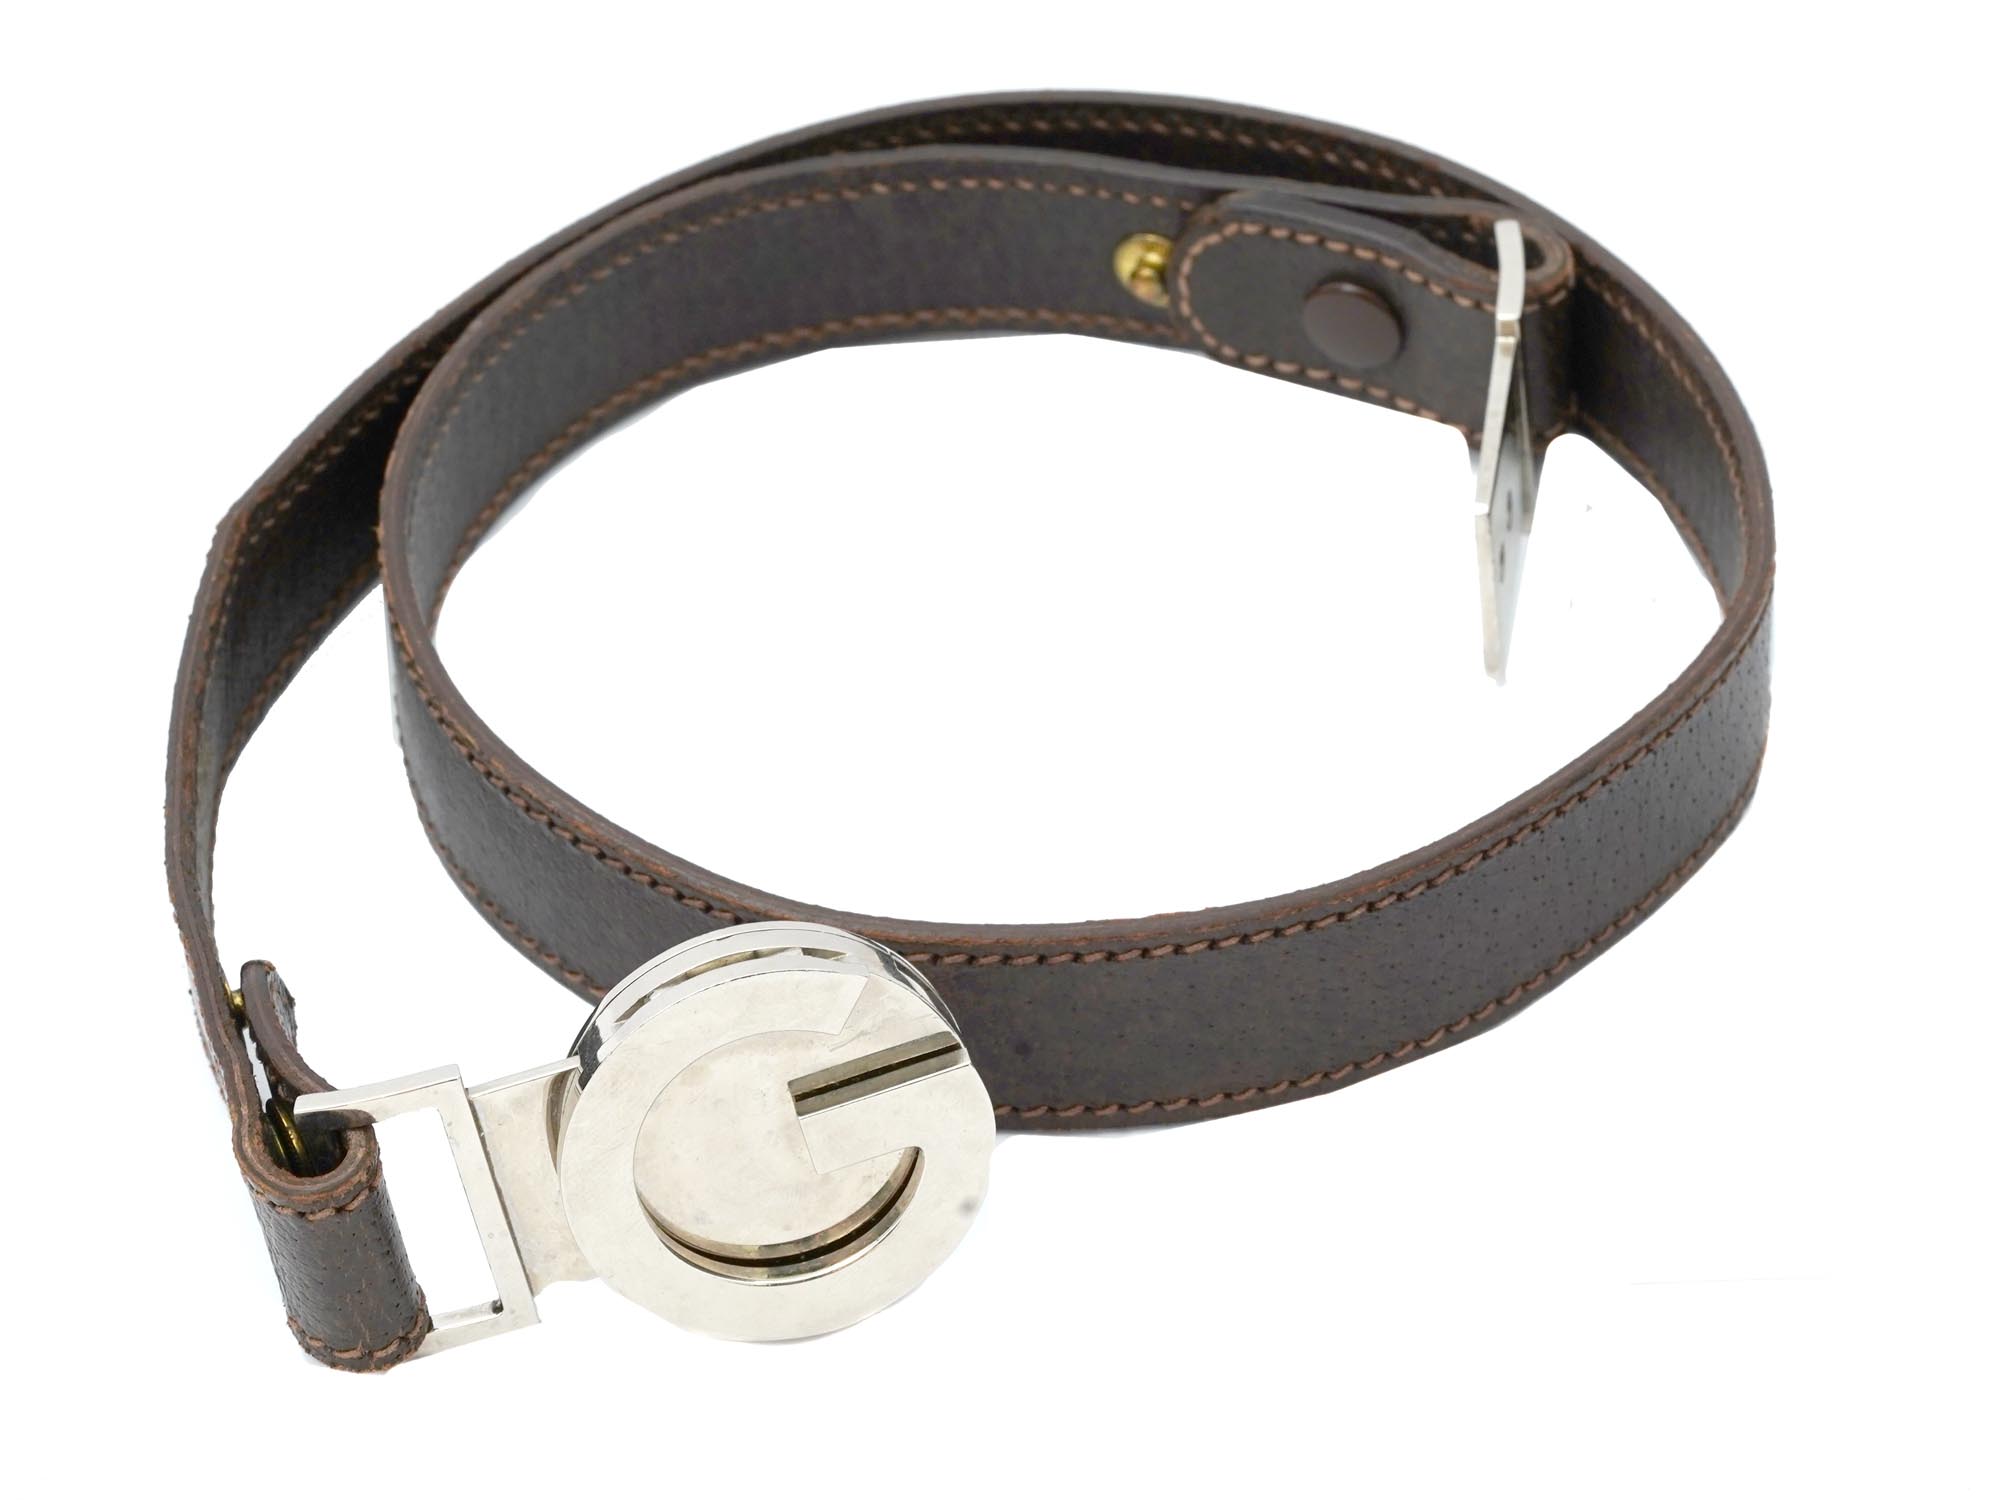 VINTAGE ITALIAN LADIES BROWN LEATHER BELT BY GUCCI PIC-0